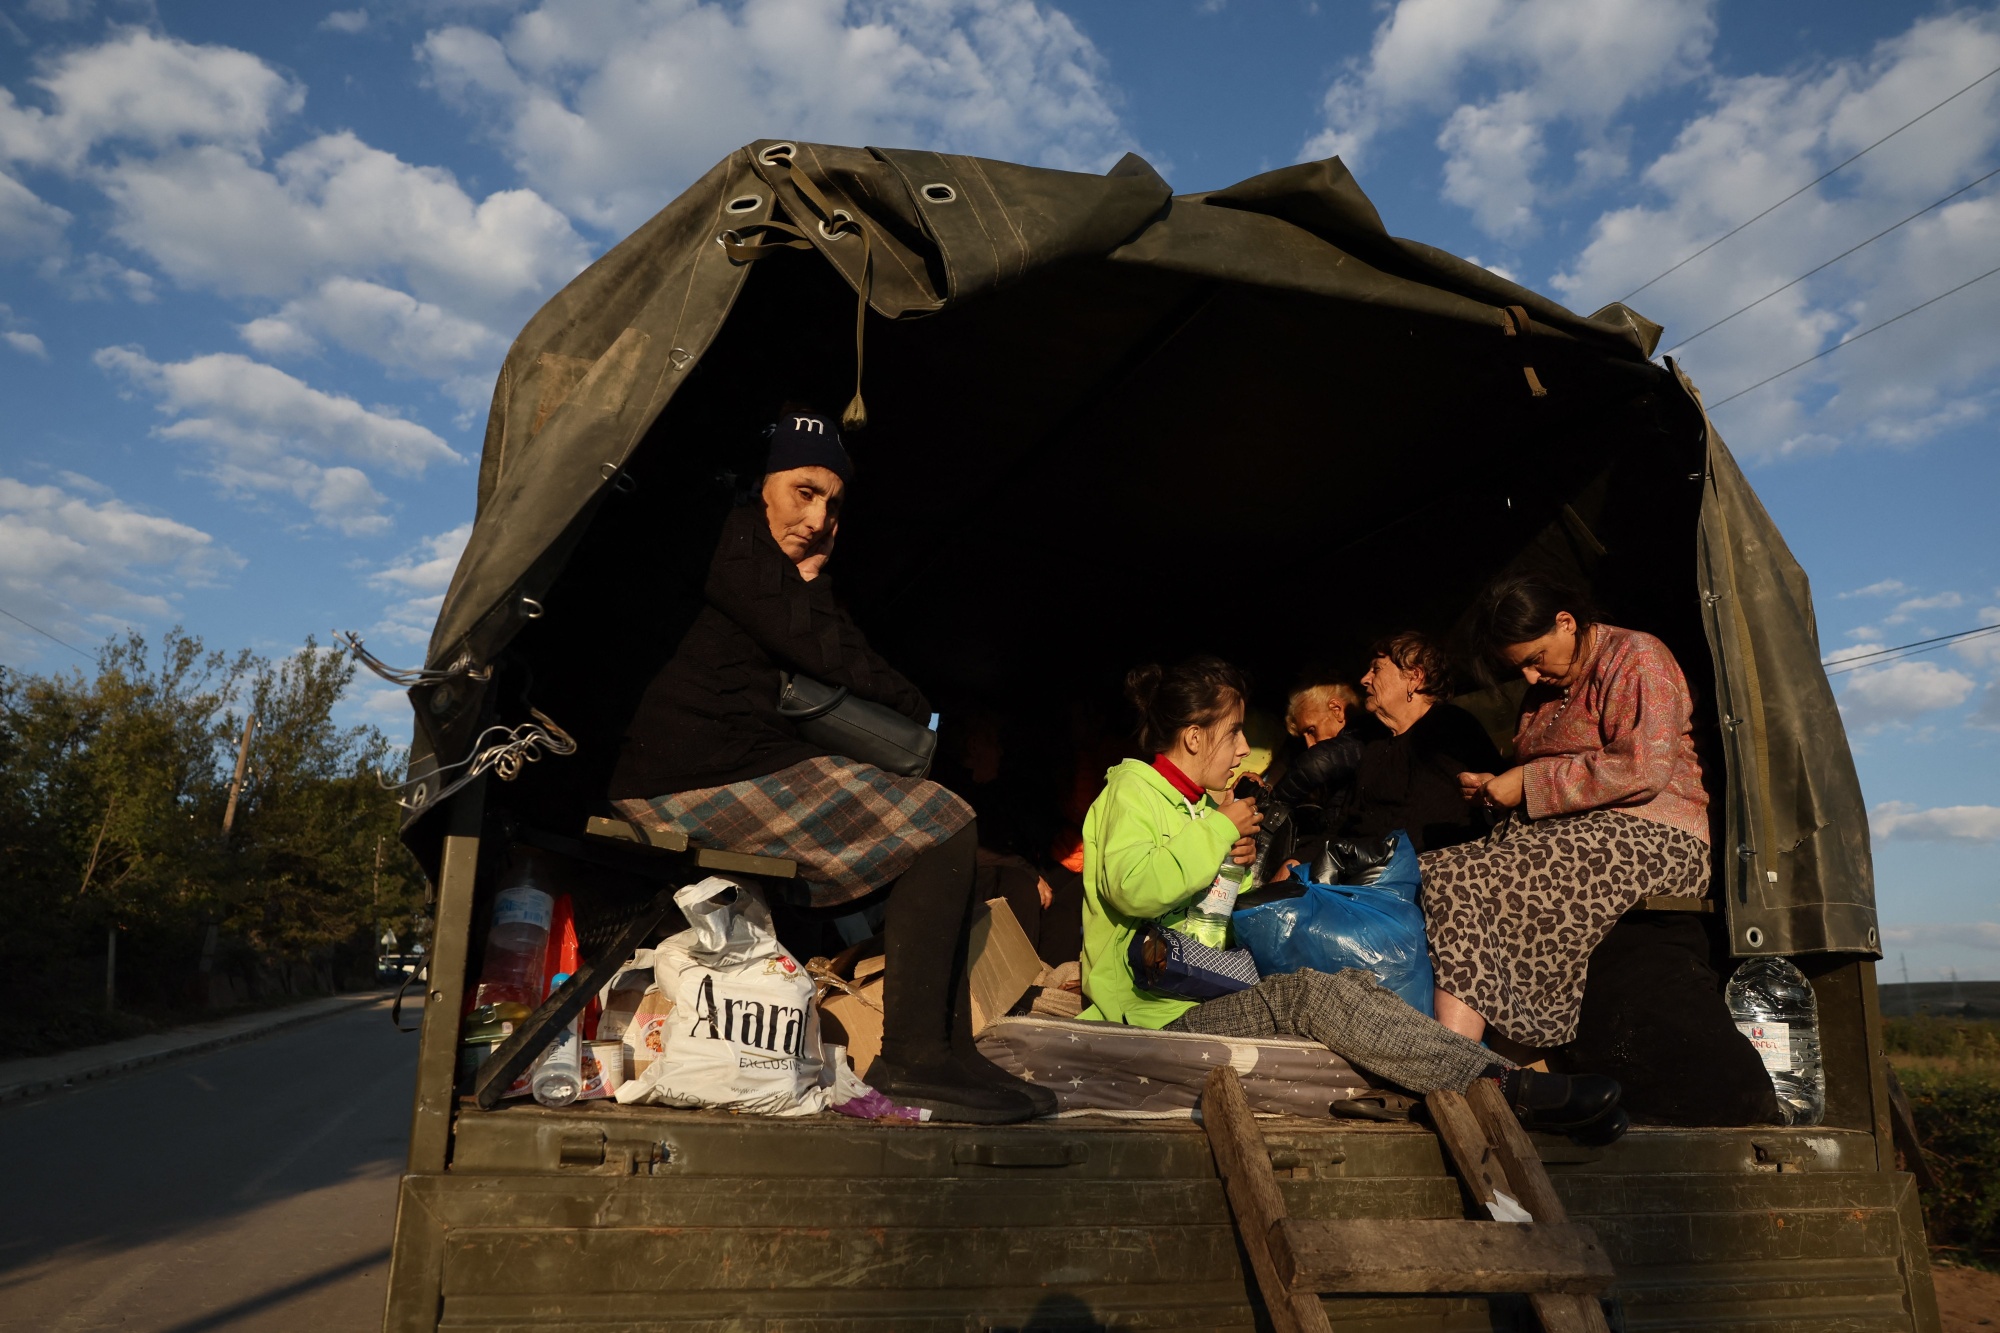 Armenians Fleeing Nagorno-Karabakh in 'Direct Act of Ethnic Cleansing' by  Azerbaijan